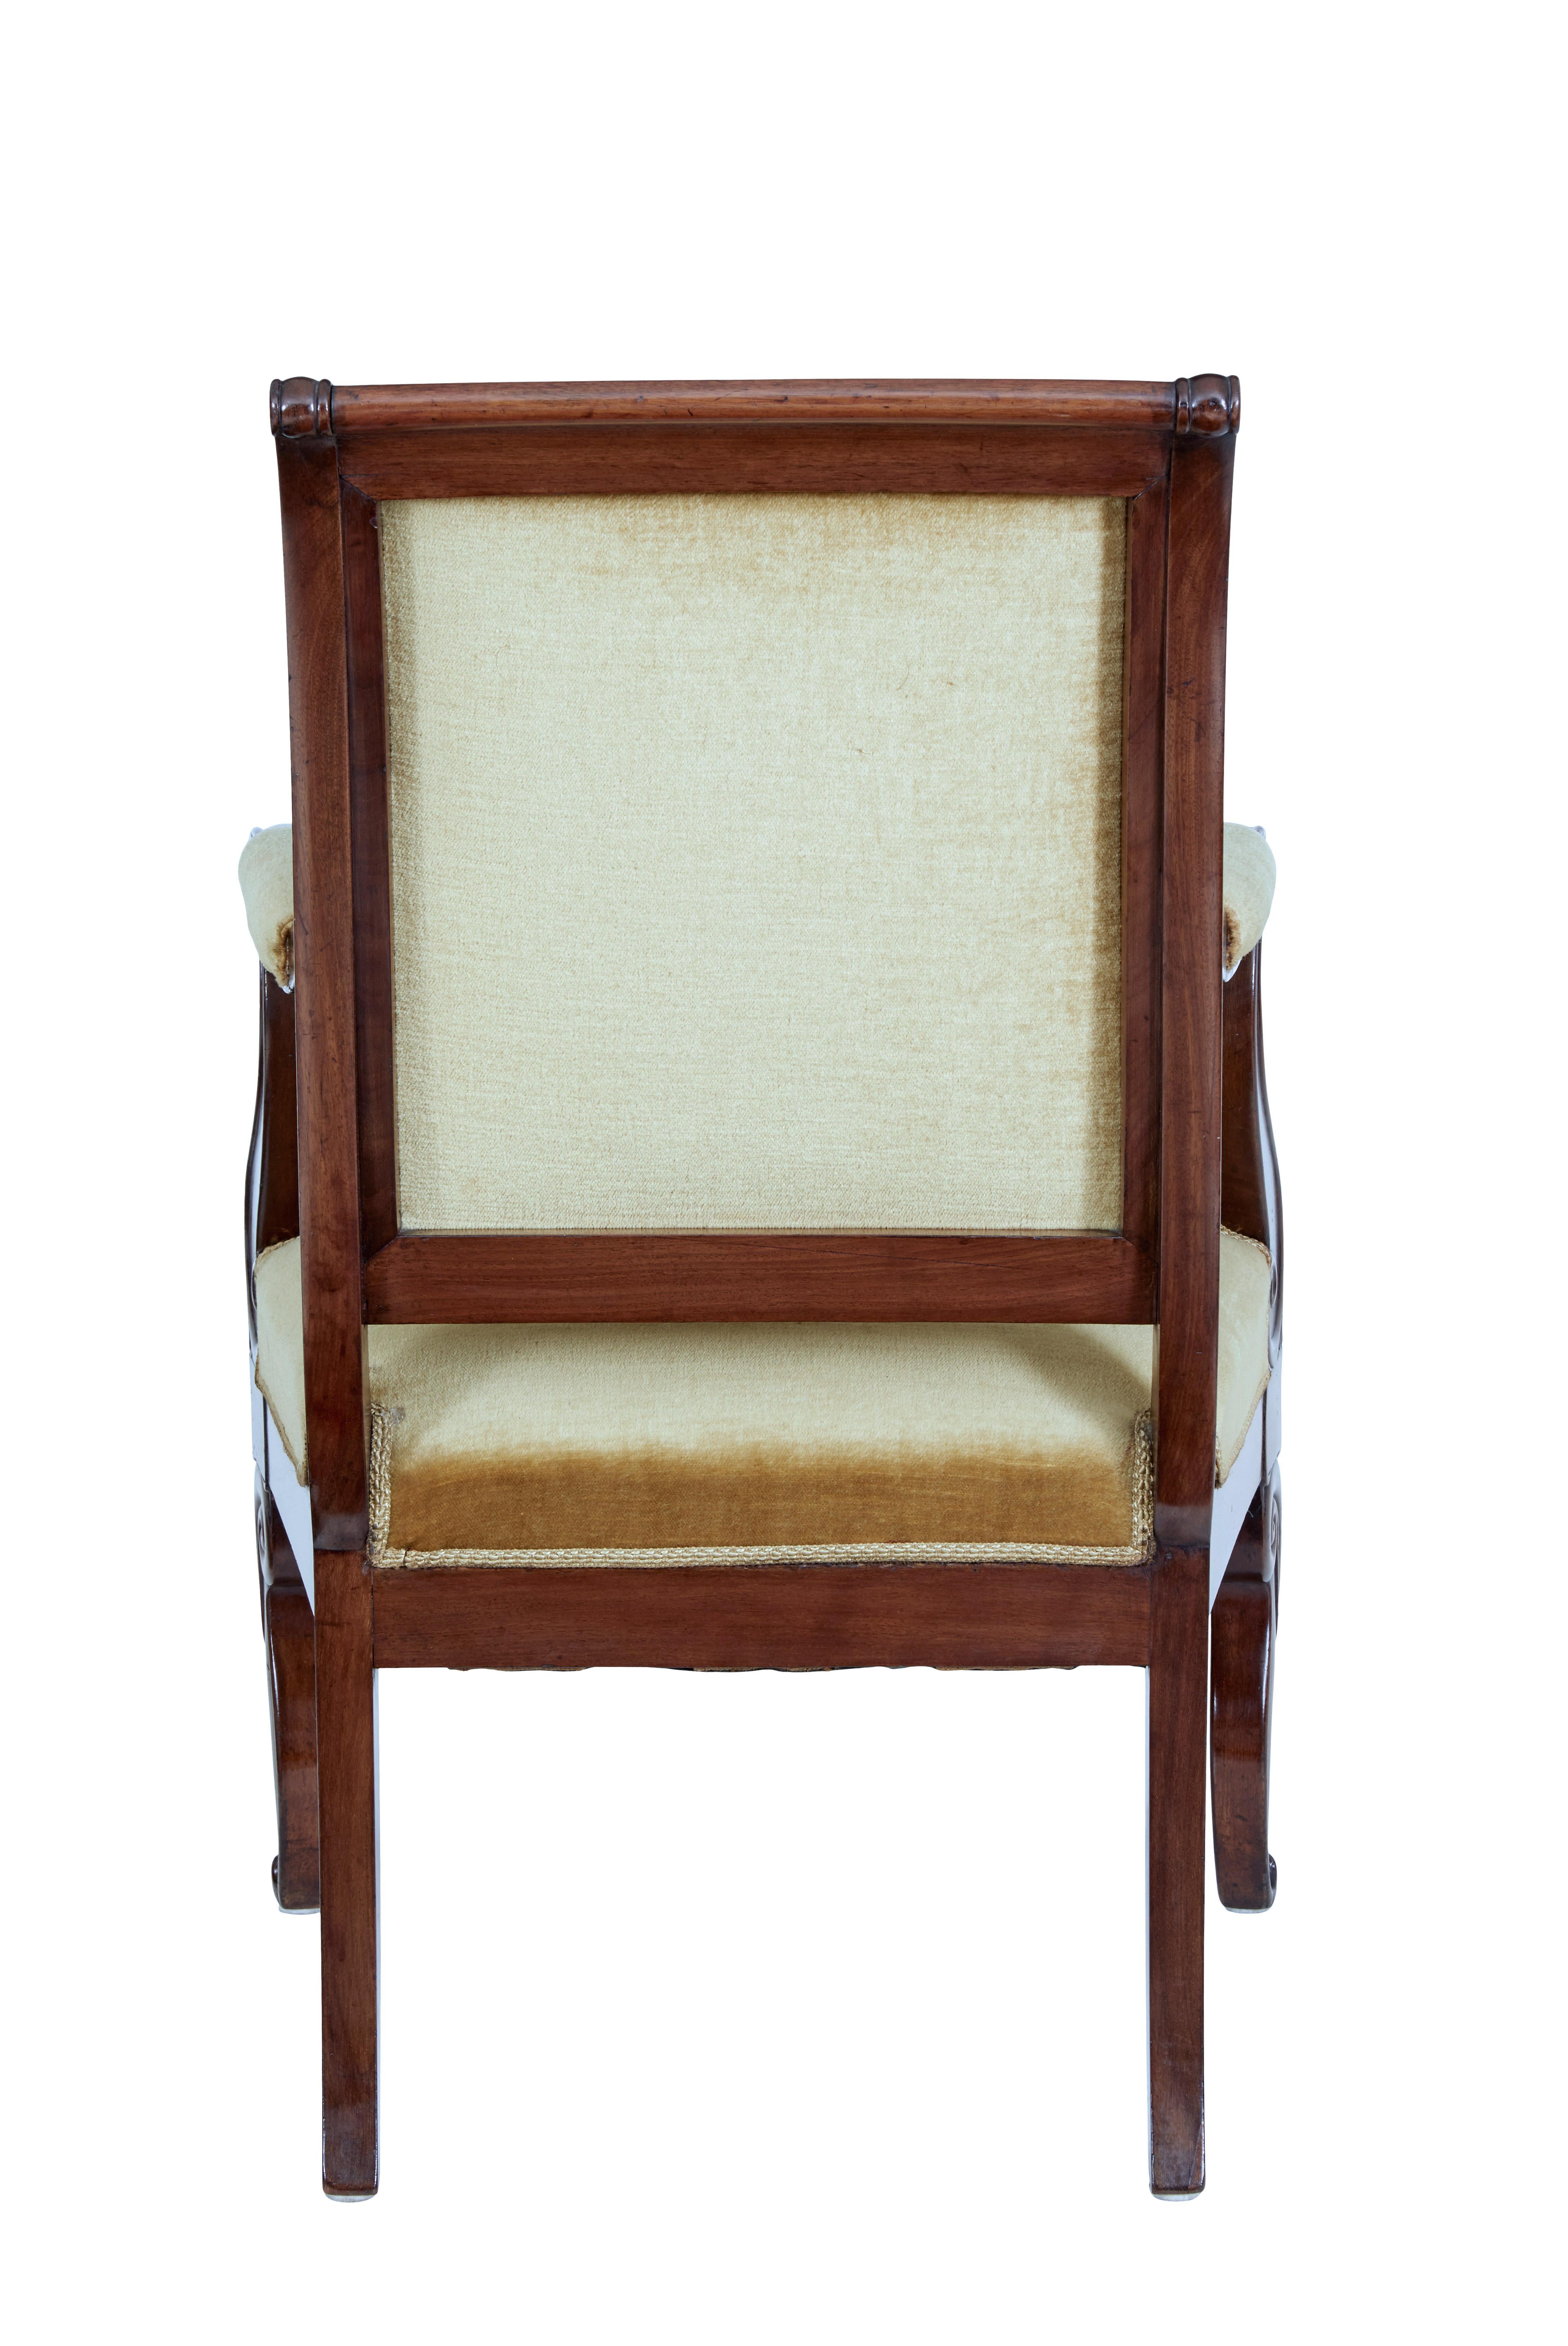 Carved 19th Century French Empire Mahogany Armchair